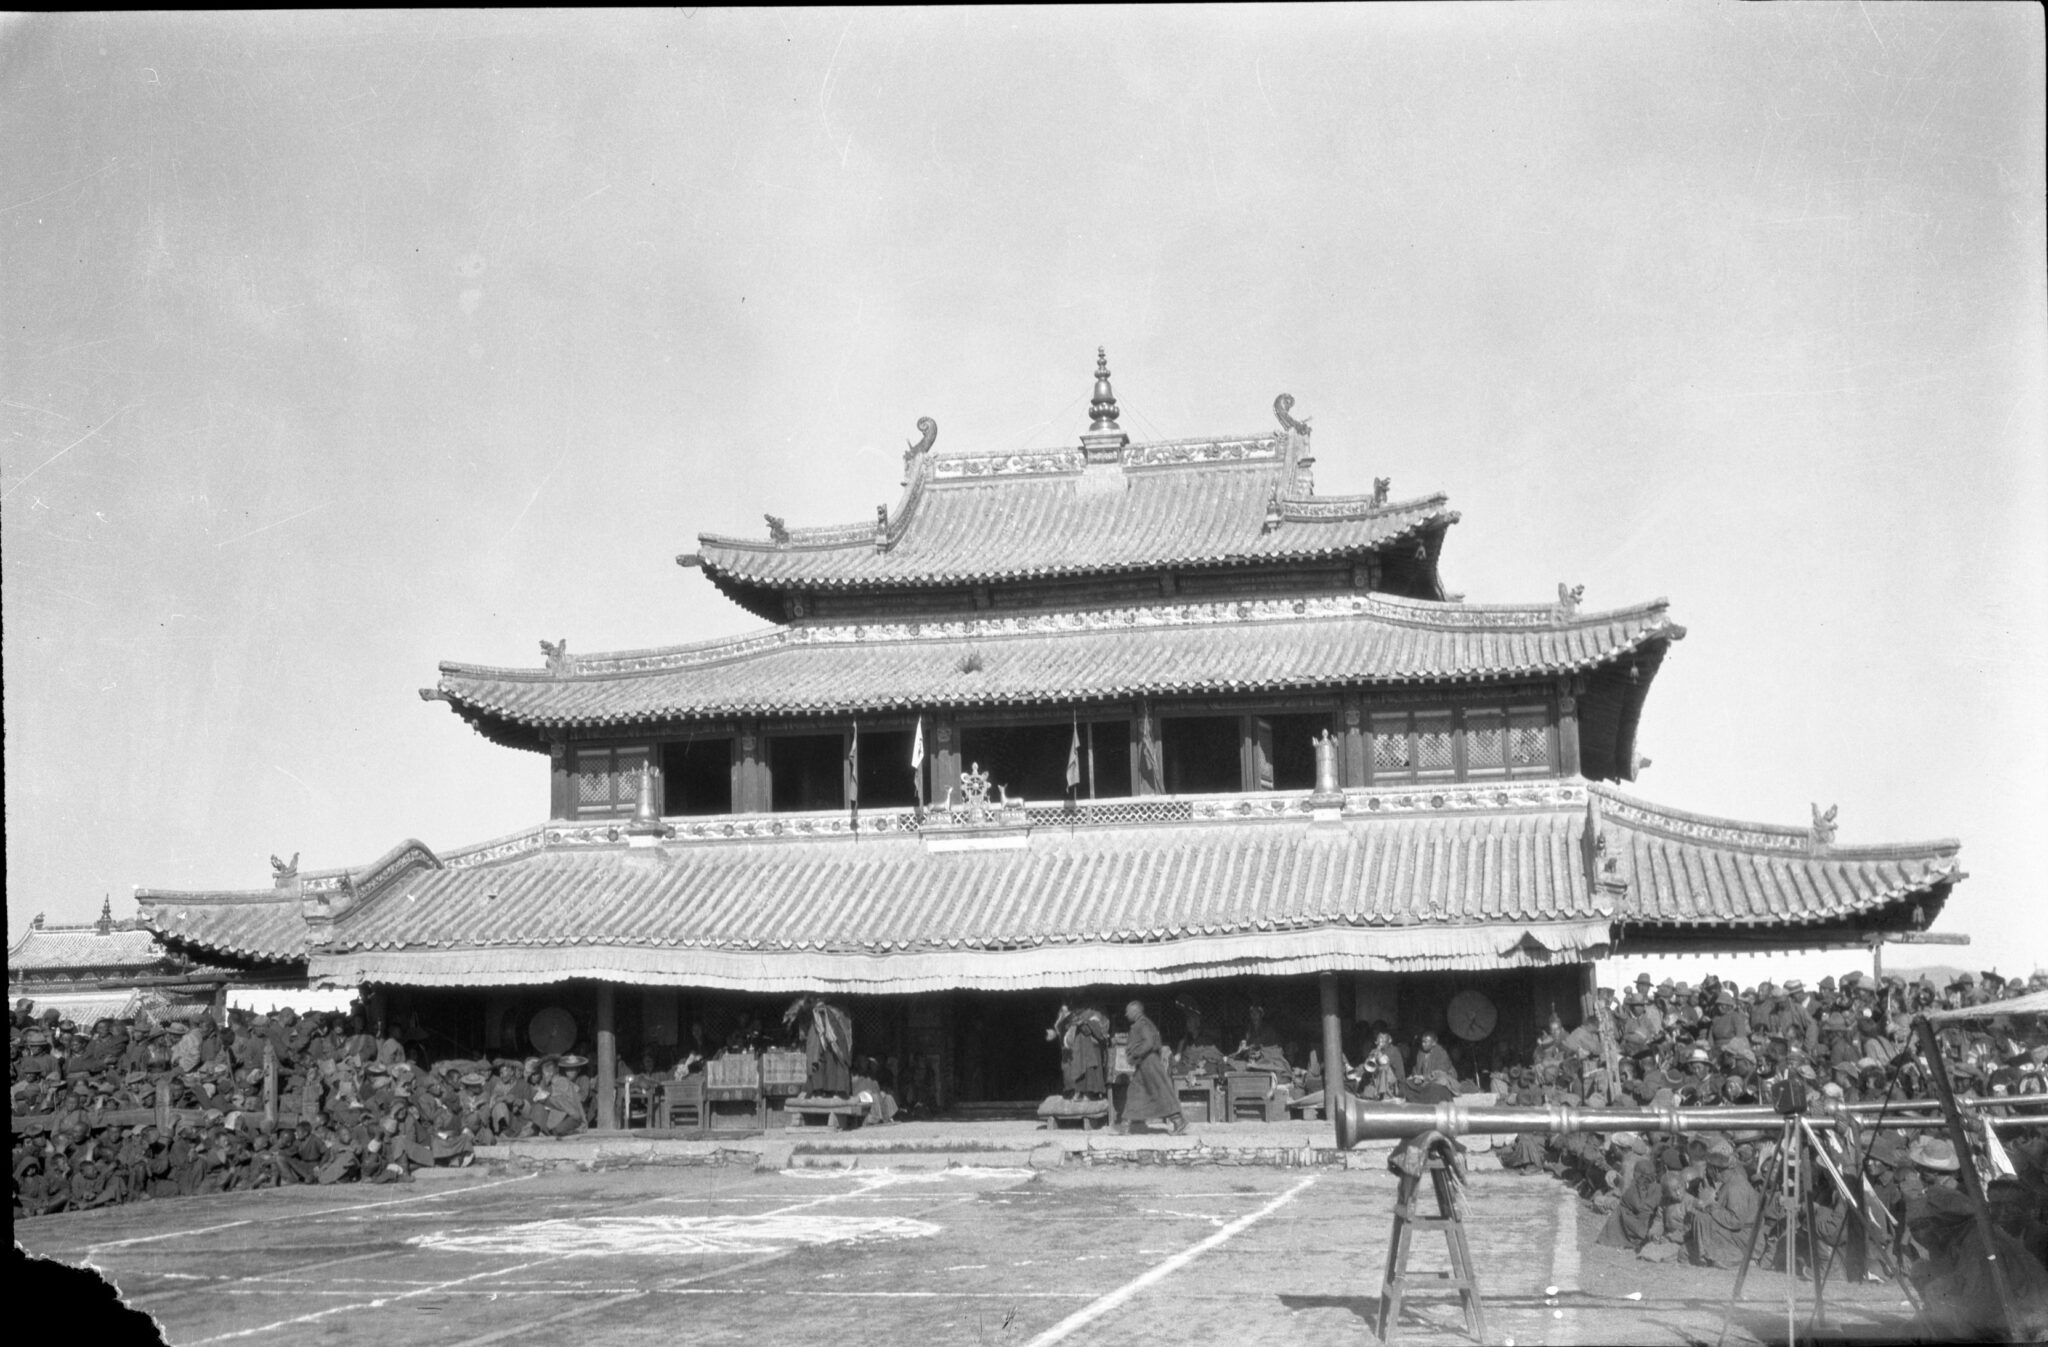 Black and white photograph of forecourt and temple featuring triple-pagoda roof decorated with finials